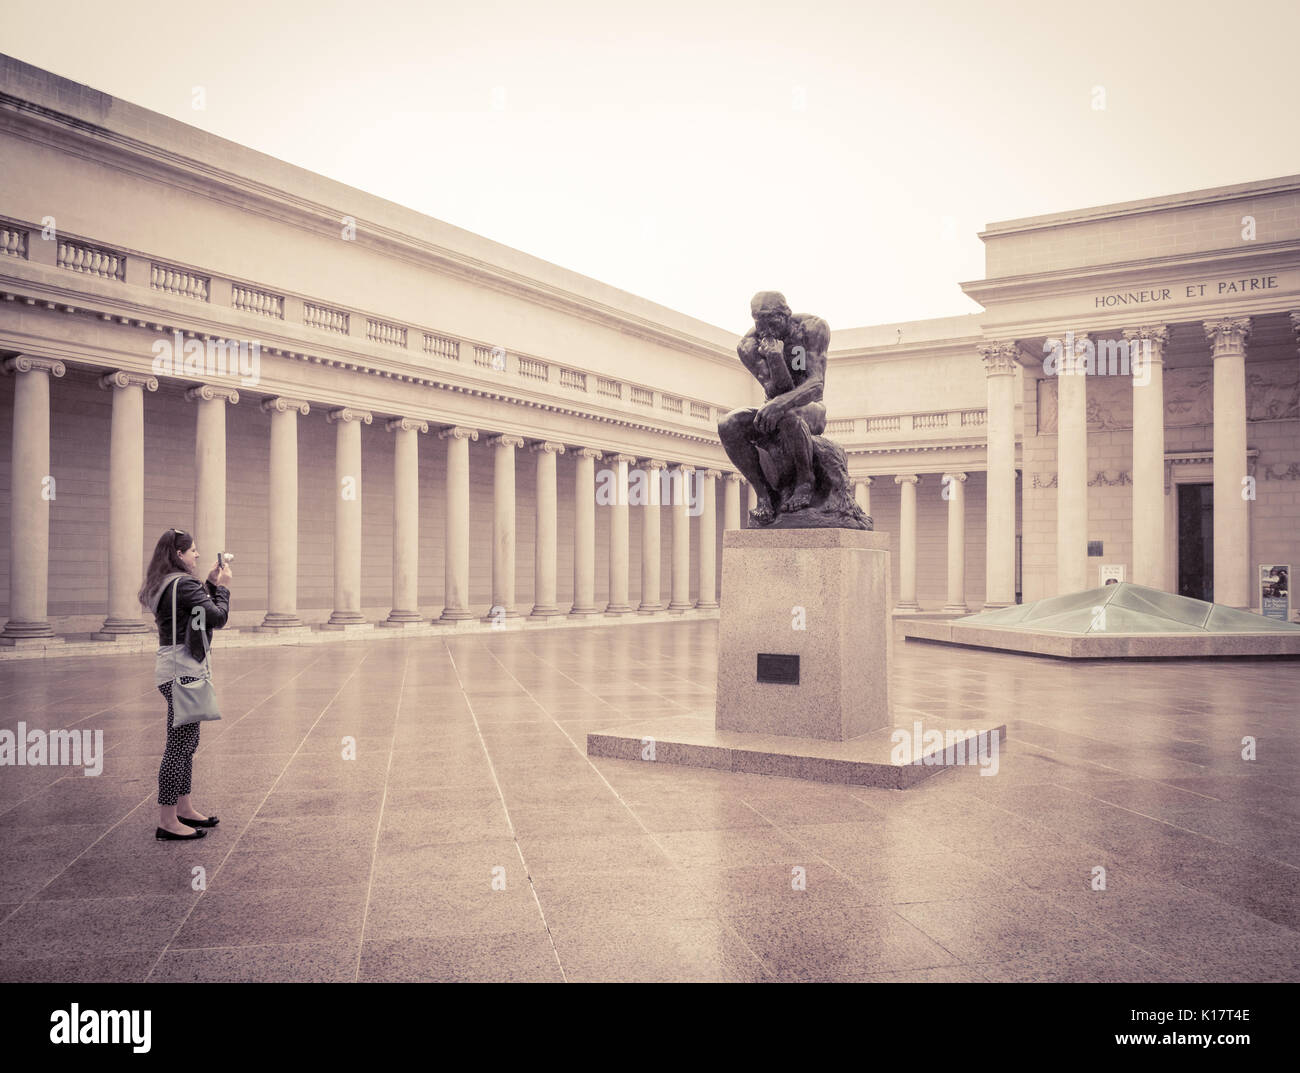 The Court of Honor, featuring a cast of the statue The Thinker, by Auguste Rodin at The Legion of Honor fine art museum in San Francisco. Stock Photo